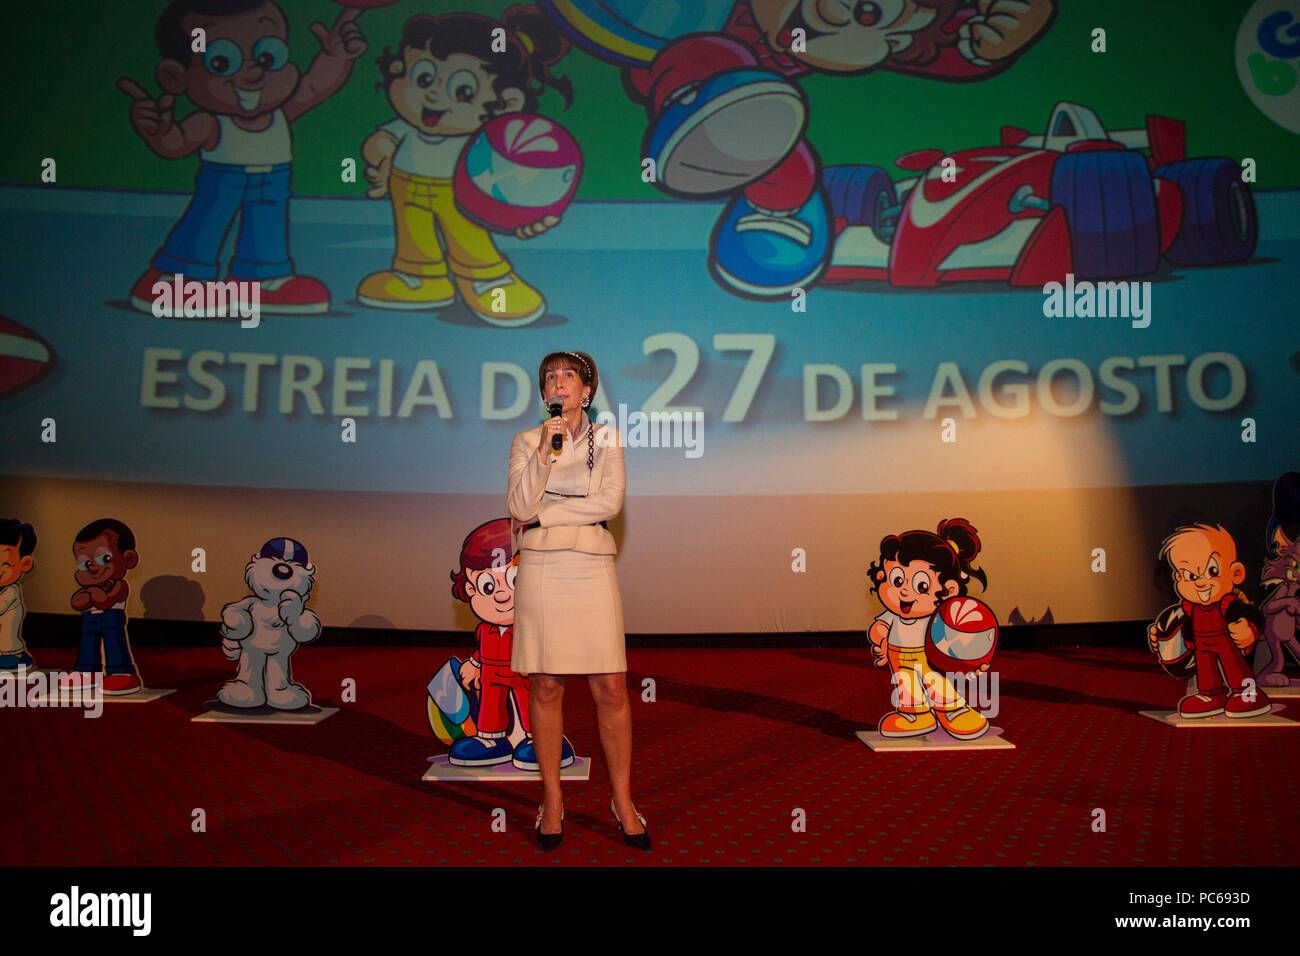 SÃO PAULO, SP - 31.07.2018: ANIMAÇÃO DO SENNINHA É LANÇADA EM SP - This event was held on Tuesday (31) the launch event of the new animated series of the character Senninha that will premiere on 08/08 on Gloobat&#39;s Glat cat channel. The animation that is inspired by three-time Formula 1 champion on Senna is called &quotquot;Senninha na Pista Maluca&quot; (&amotquot;Senninha na Pista Maluca&quot;), which has 26 epis, ewithwith 11 minutes, which will be shown dai daily at various times. to mention Viviane Senna, pa, president of the Ayrton Senna Institute. (Photo: Emerson Santos/Fotoarena) Stock Photo